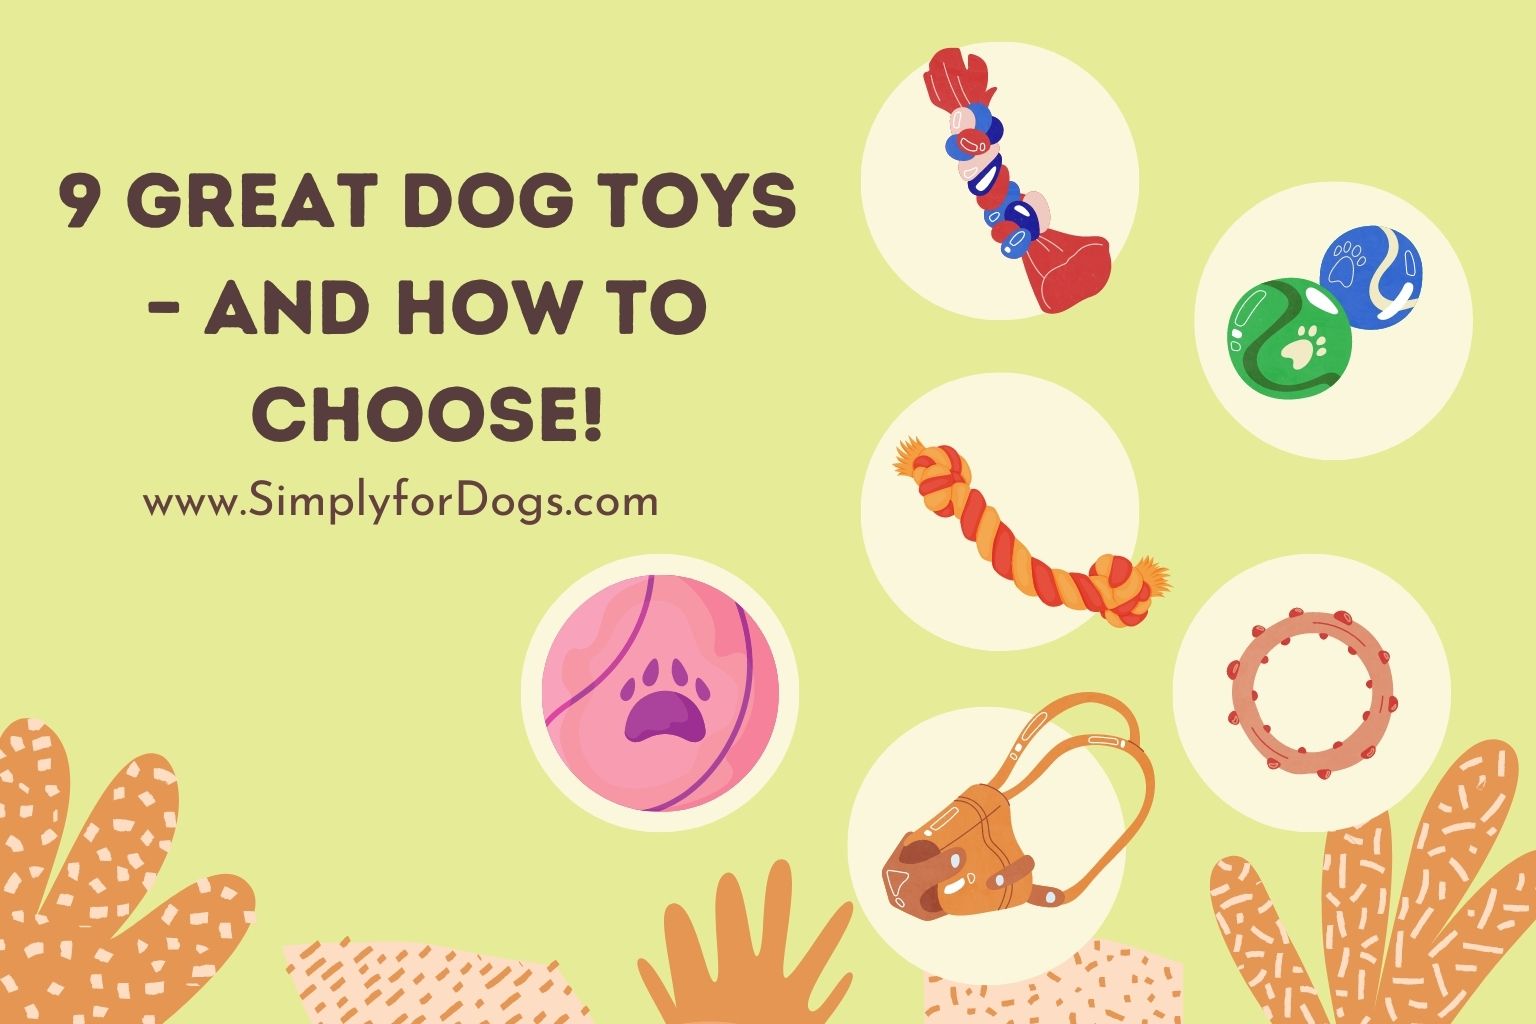 9 Great Dog Toys – and How to Choose!